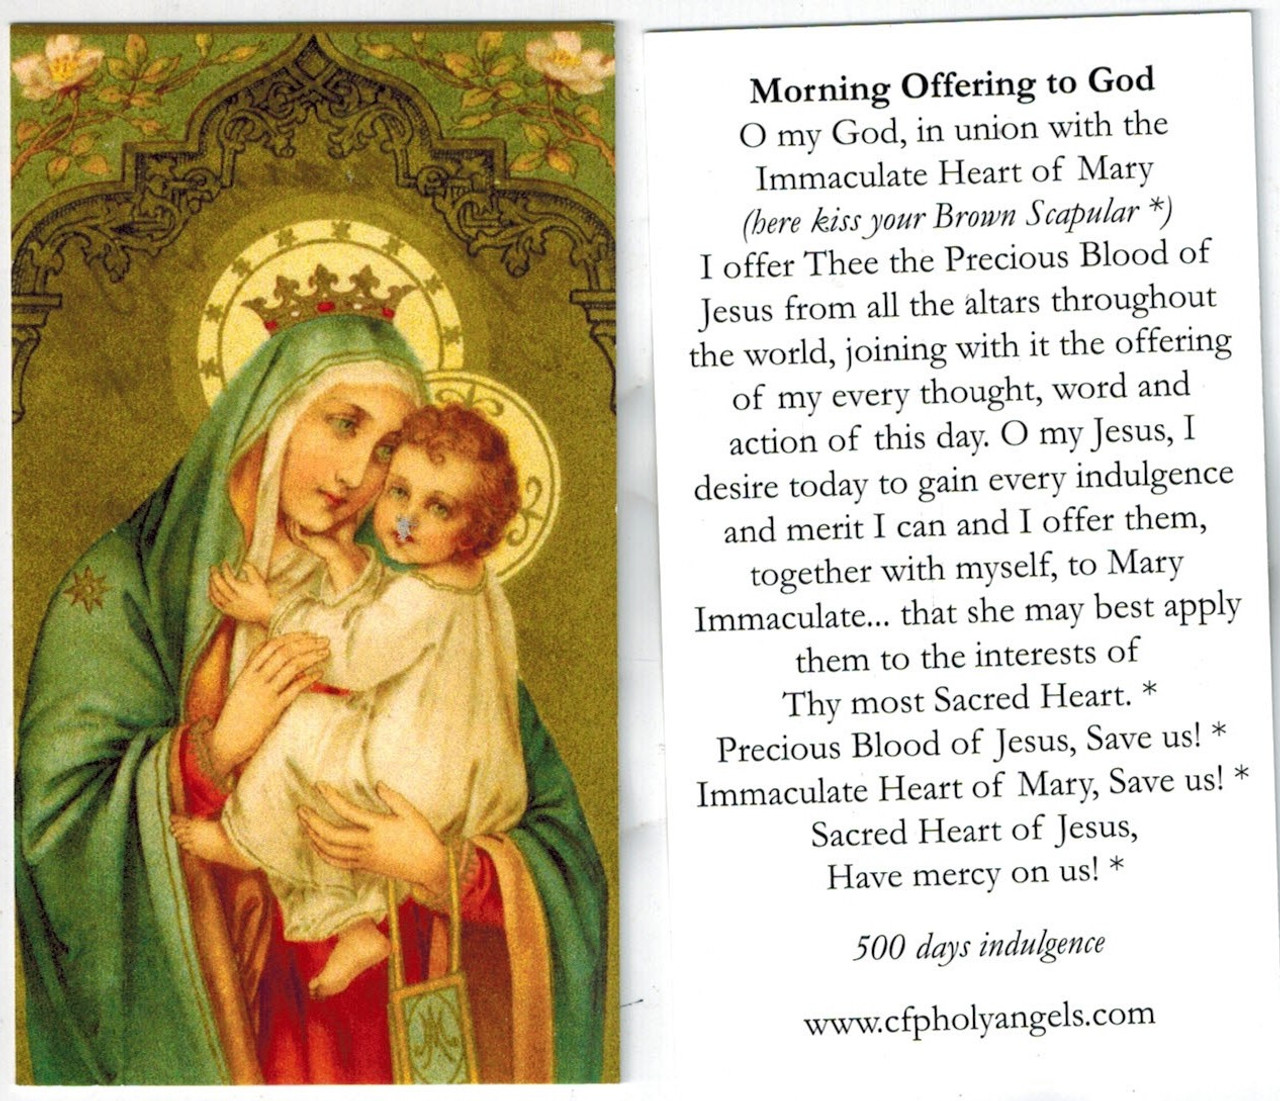 Morning Offering with scapular devotion